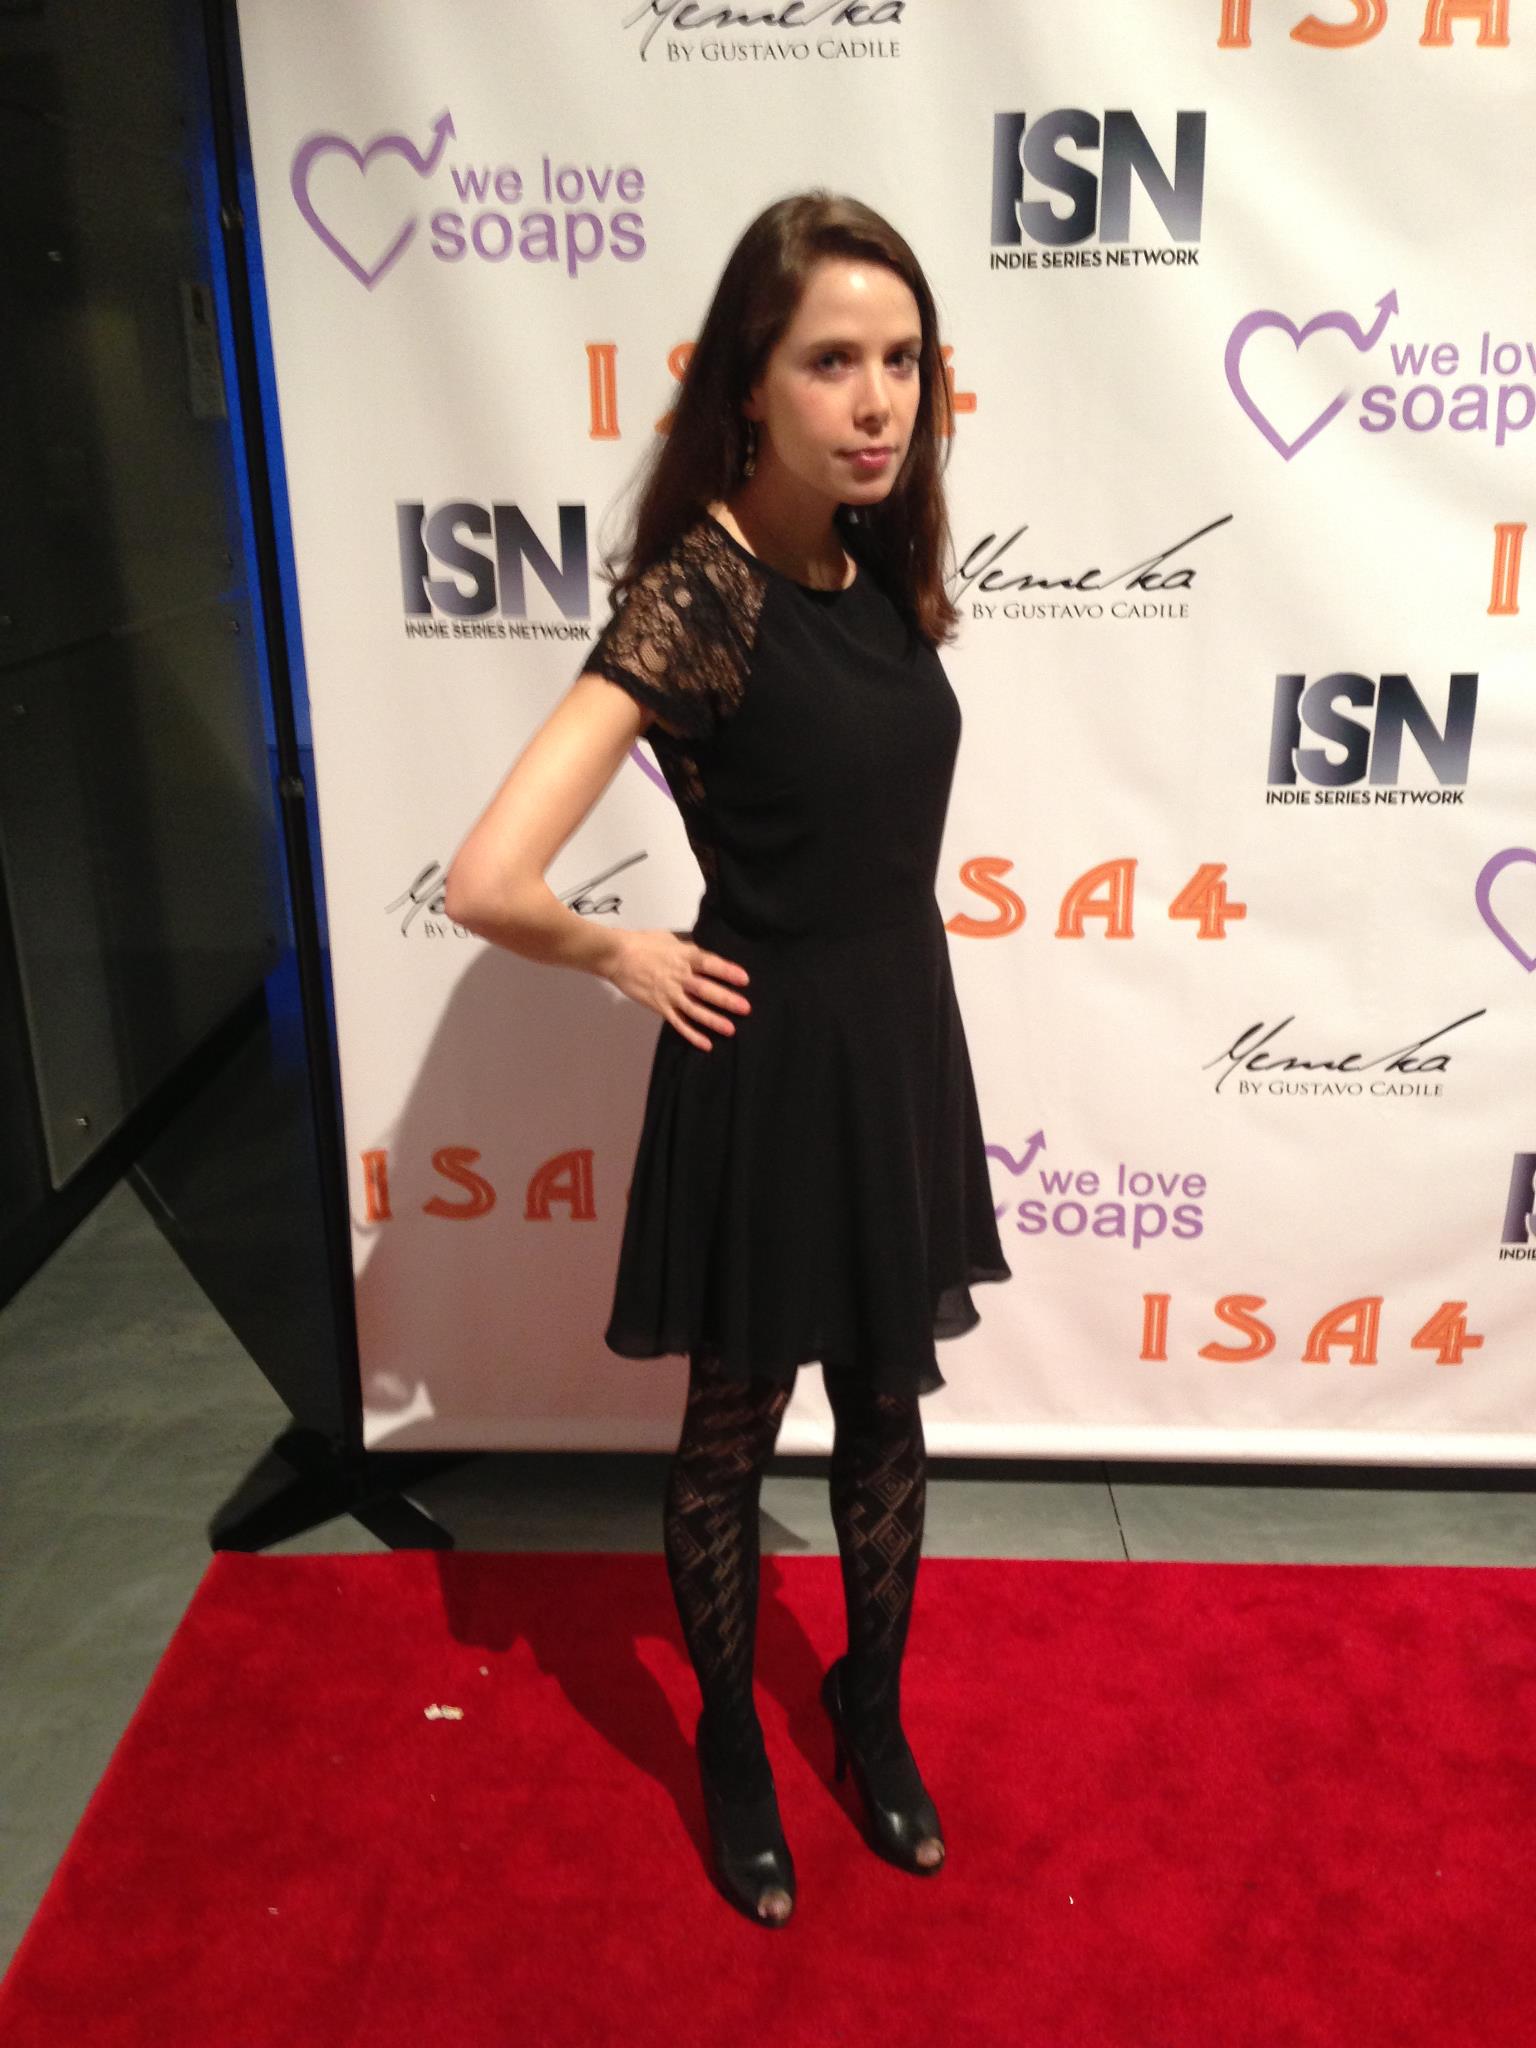 4th Annual Indie Soap Awards, Feb. 19, 2013 NYC